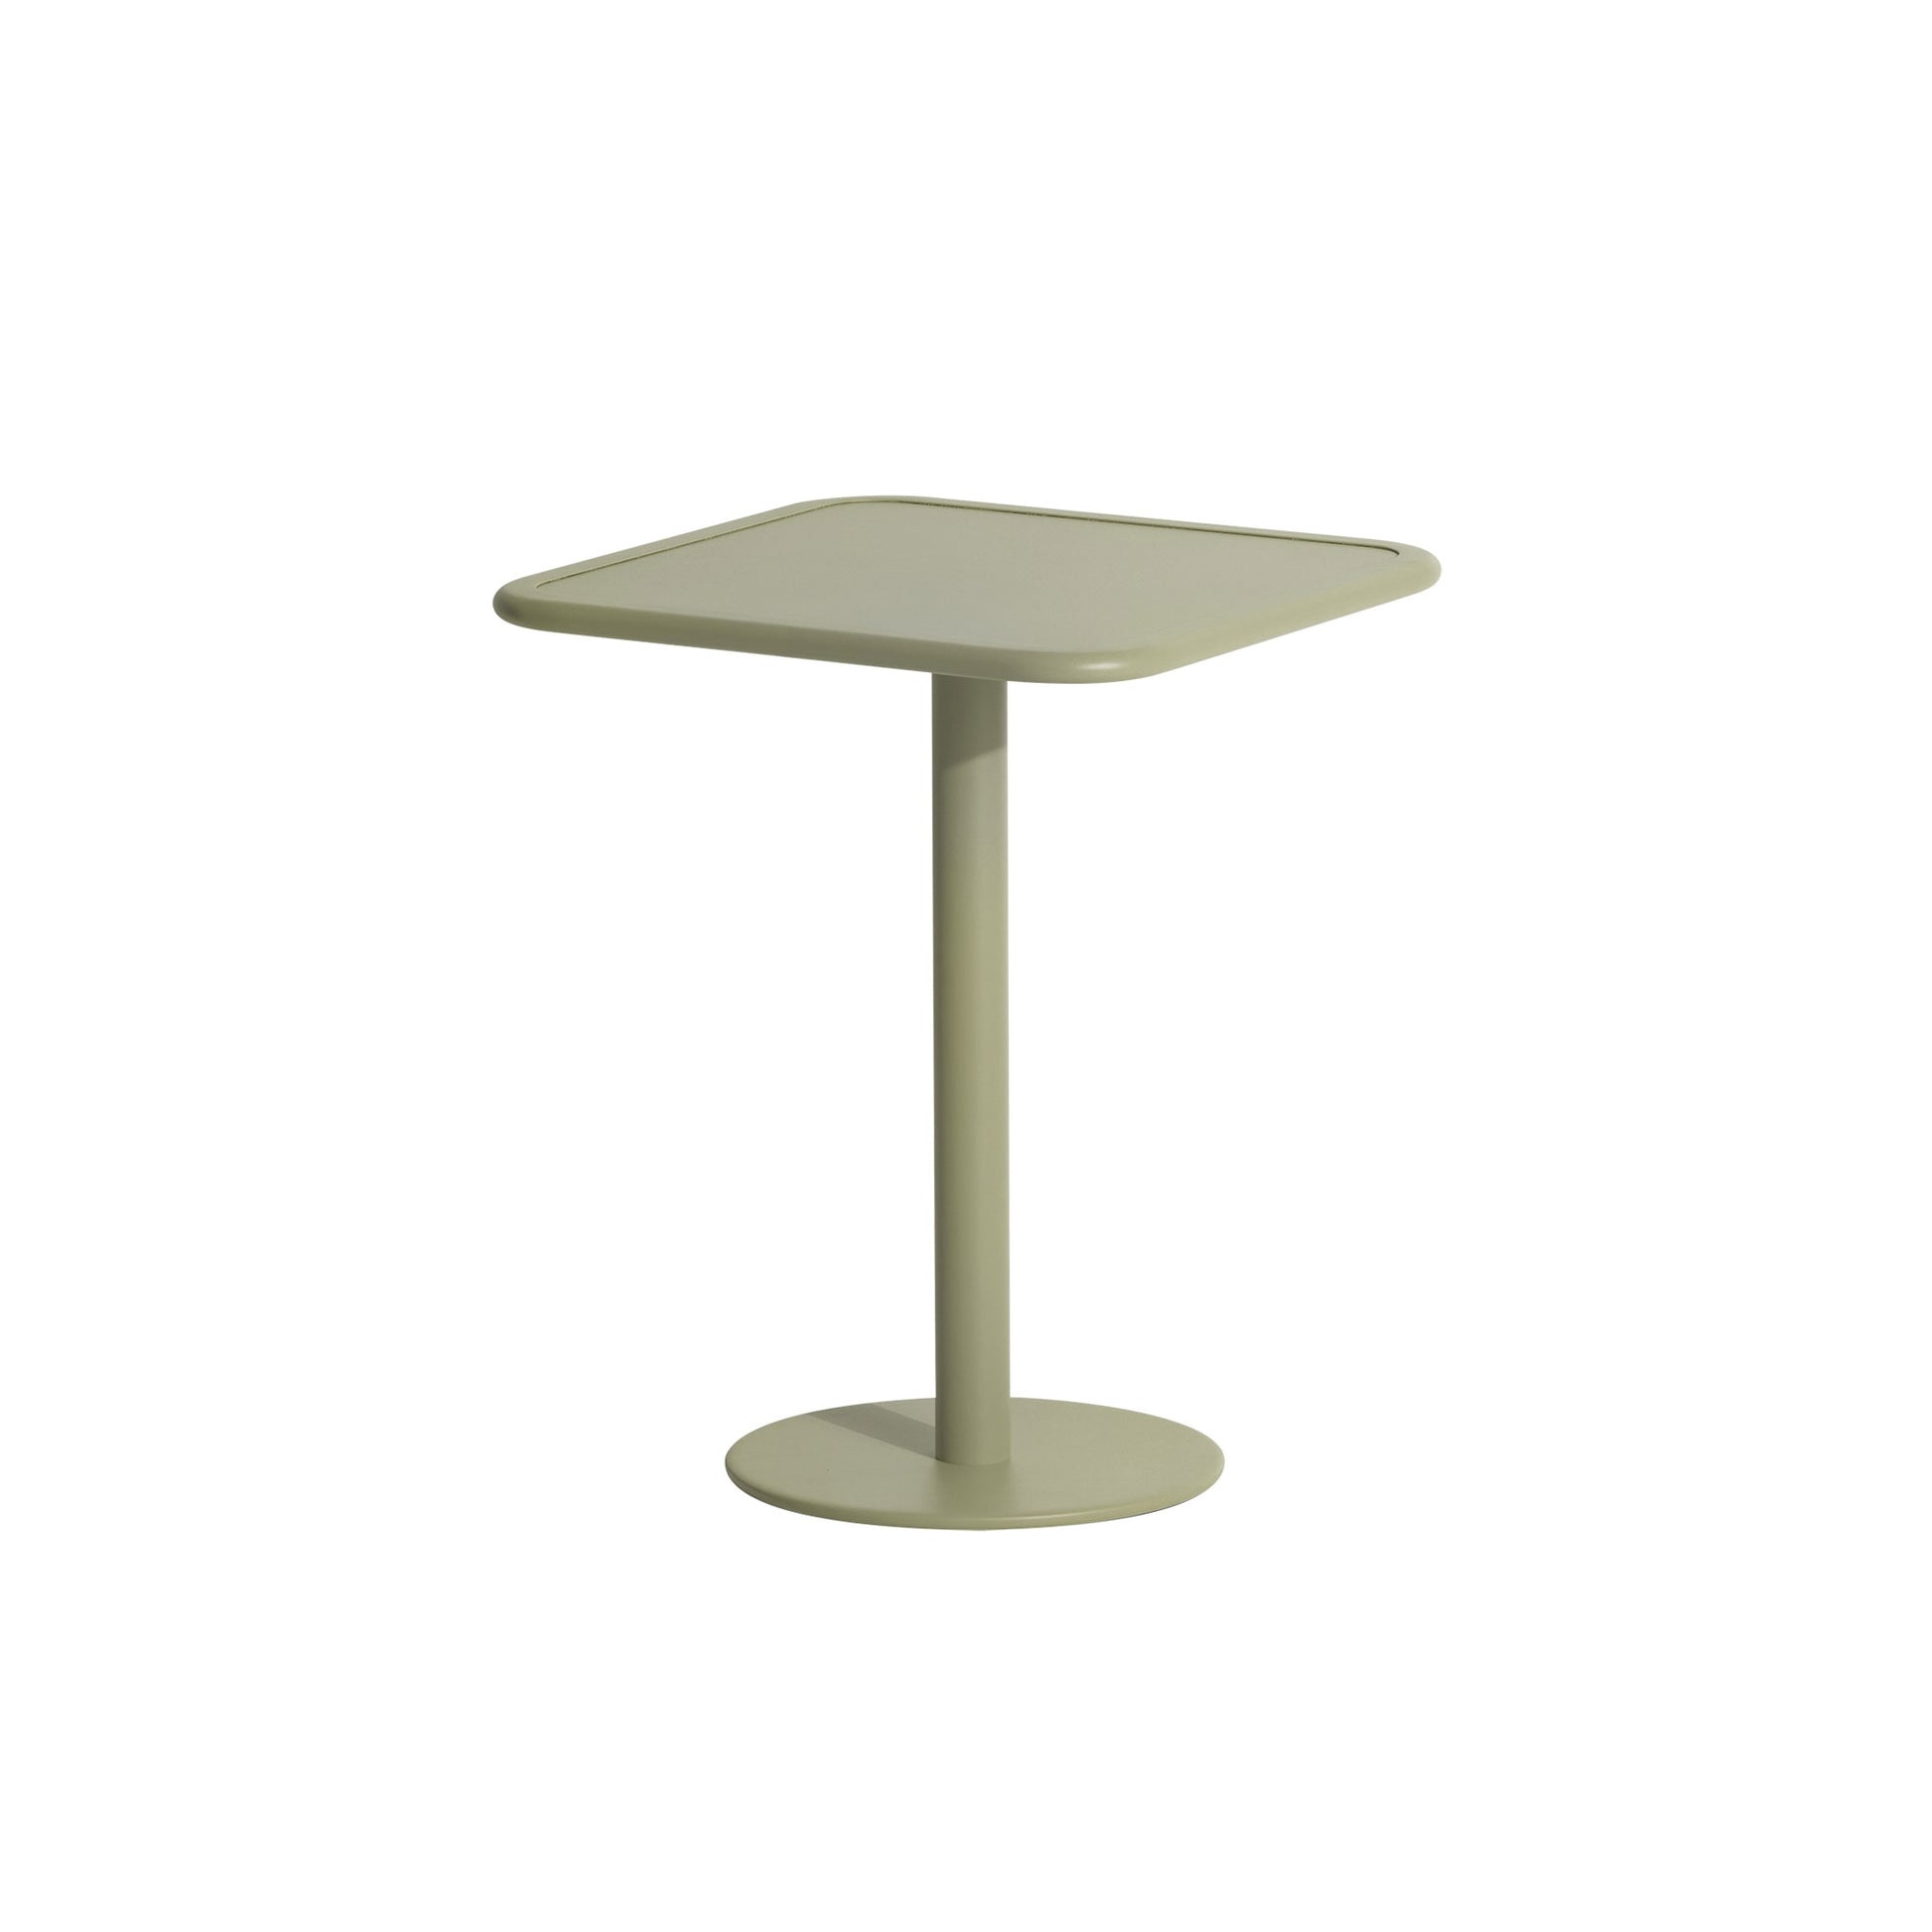 WEEK-END Square Café Table by Petite Friture #Jade green